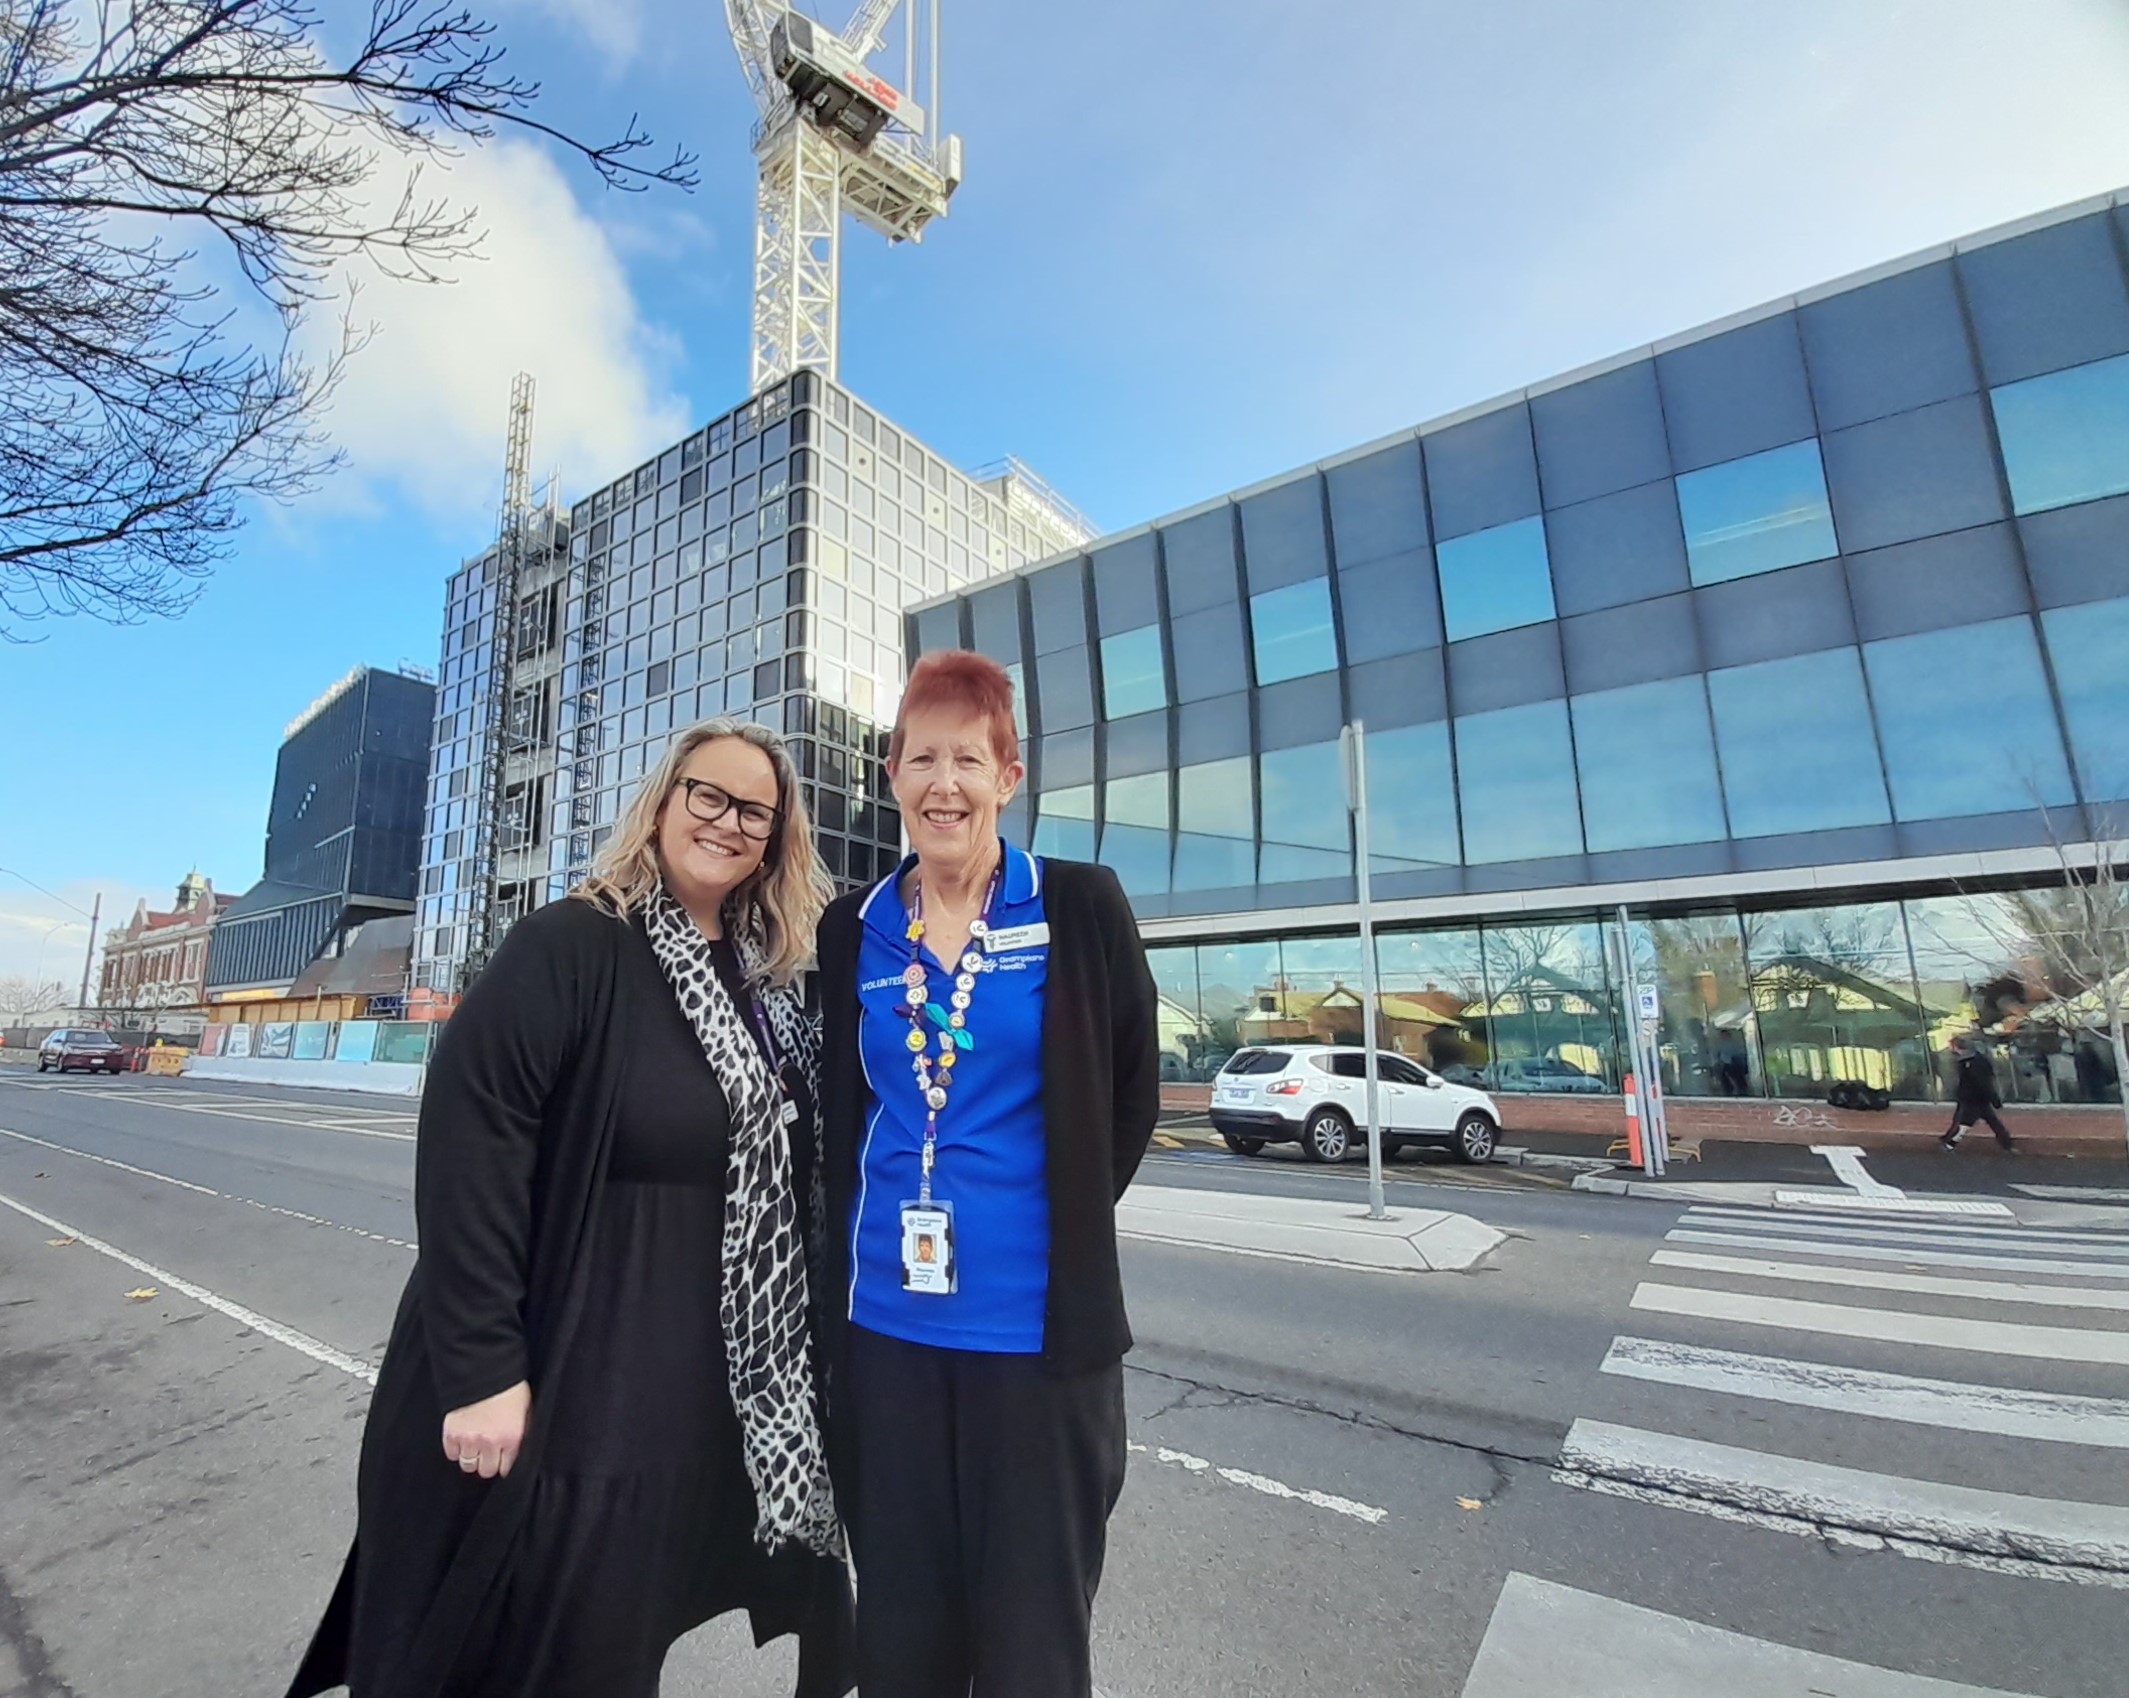 Manager of Volunteer Services for Ballarat and Stawell Leah Ferguson and Maureen Woodford pictured one last time in front of Maureen the Crane before it’s dismantled this weekend. 